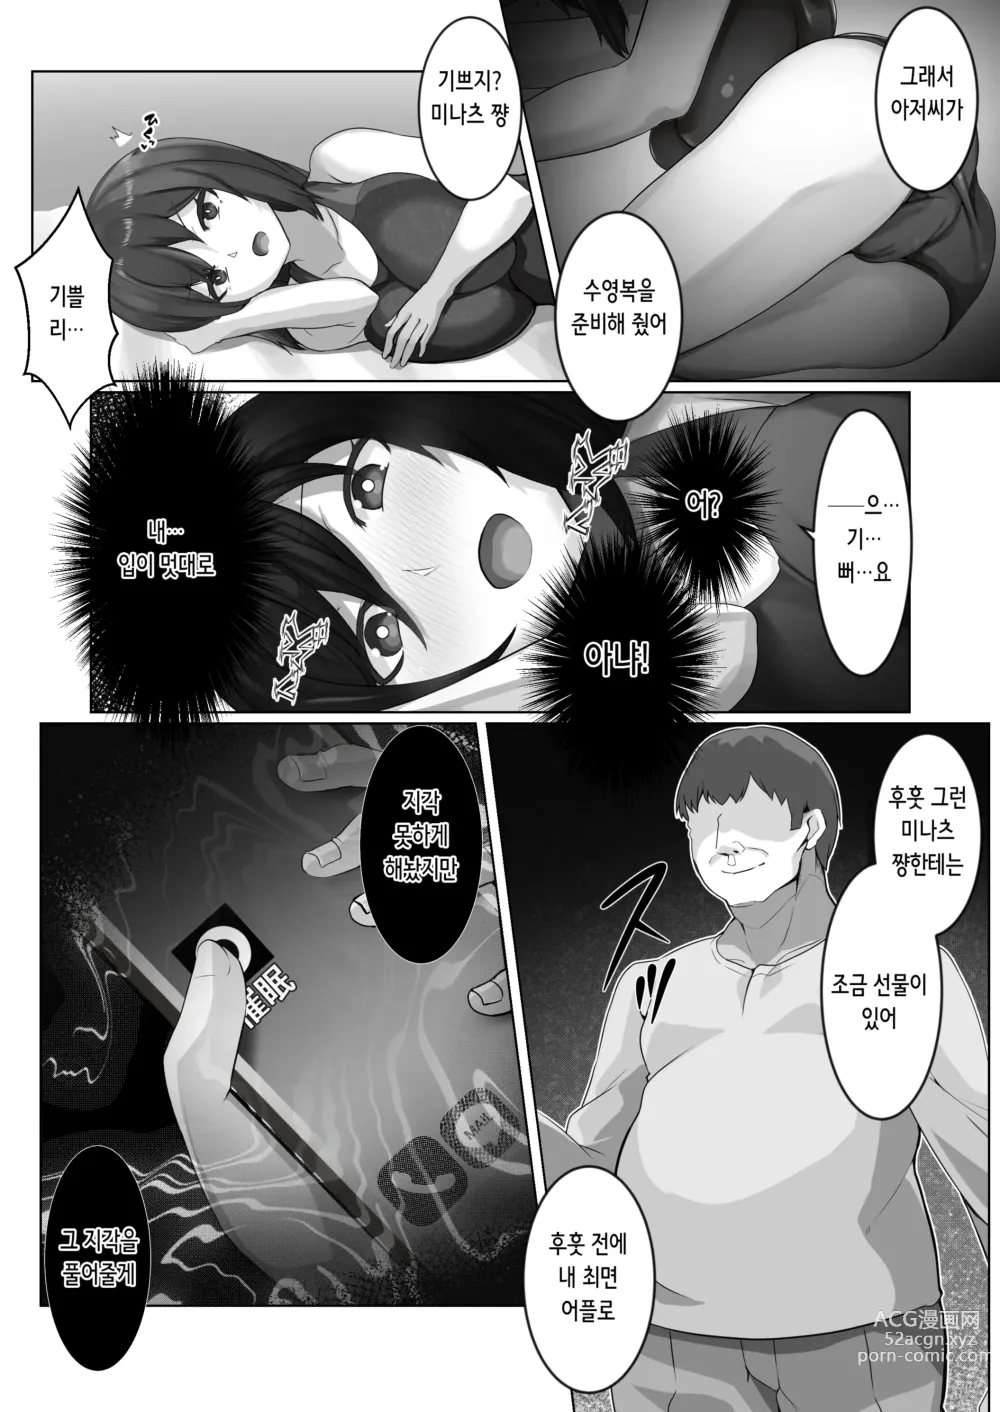 Page 9 of doujinshi 최면 이웃 JD 2